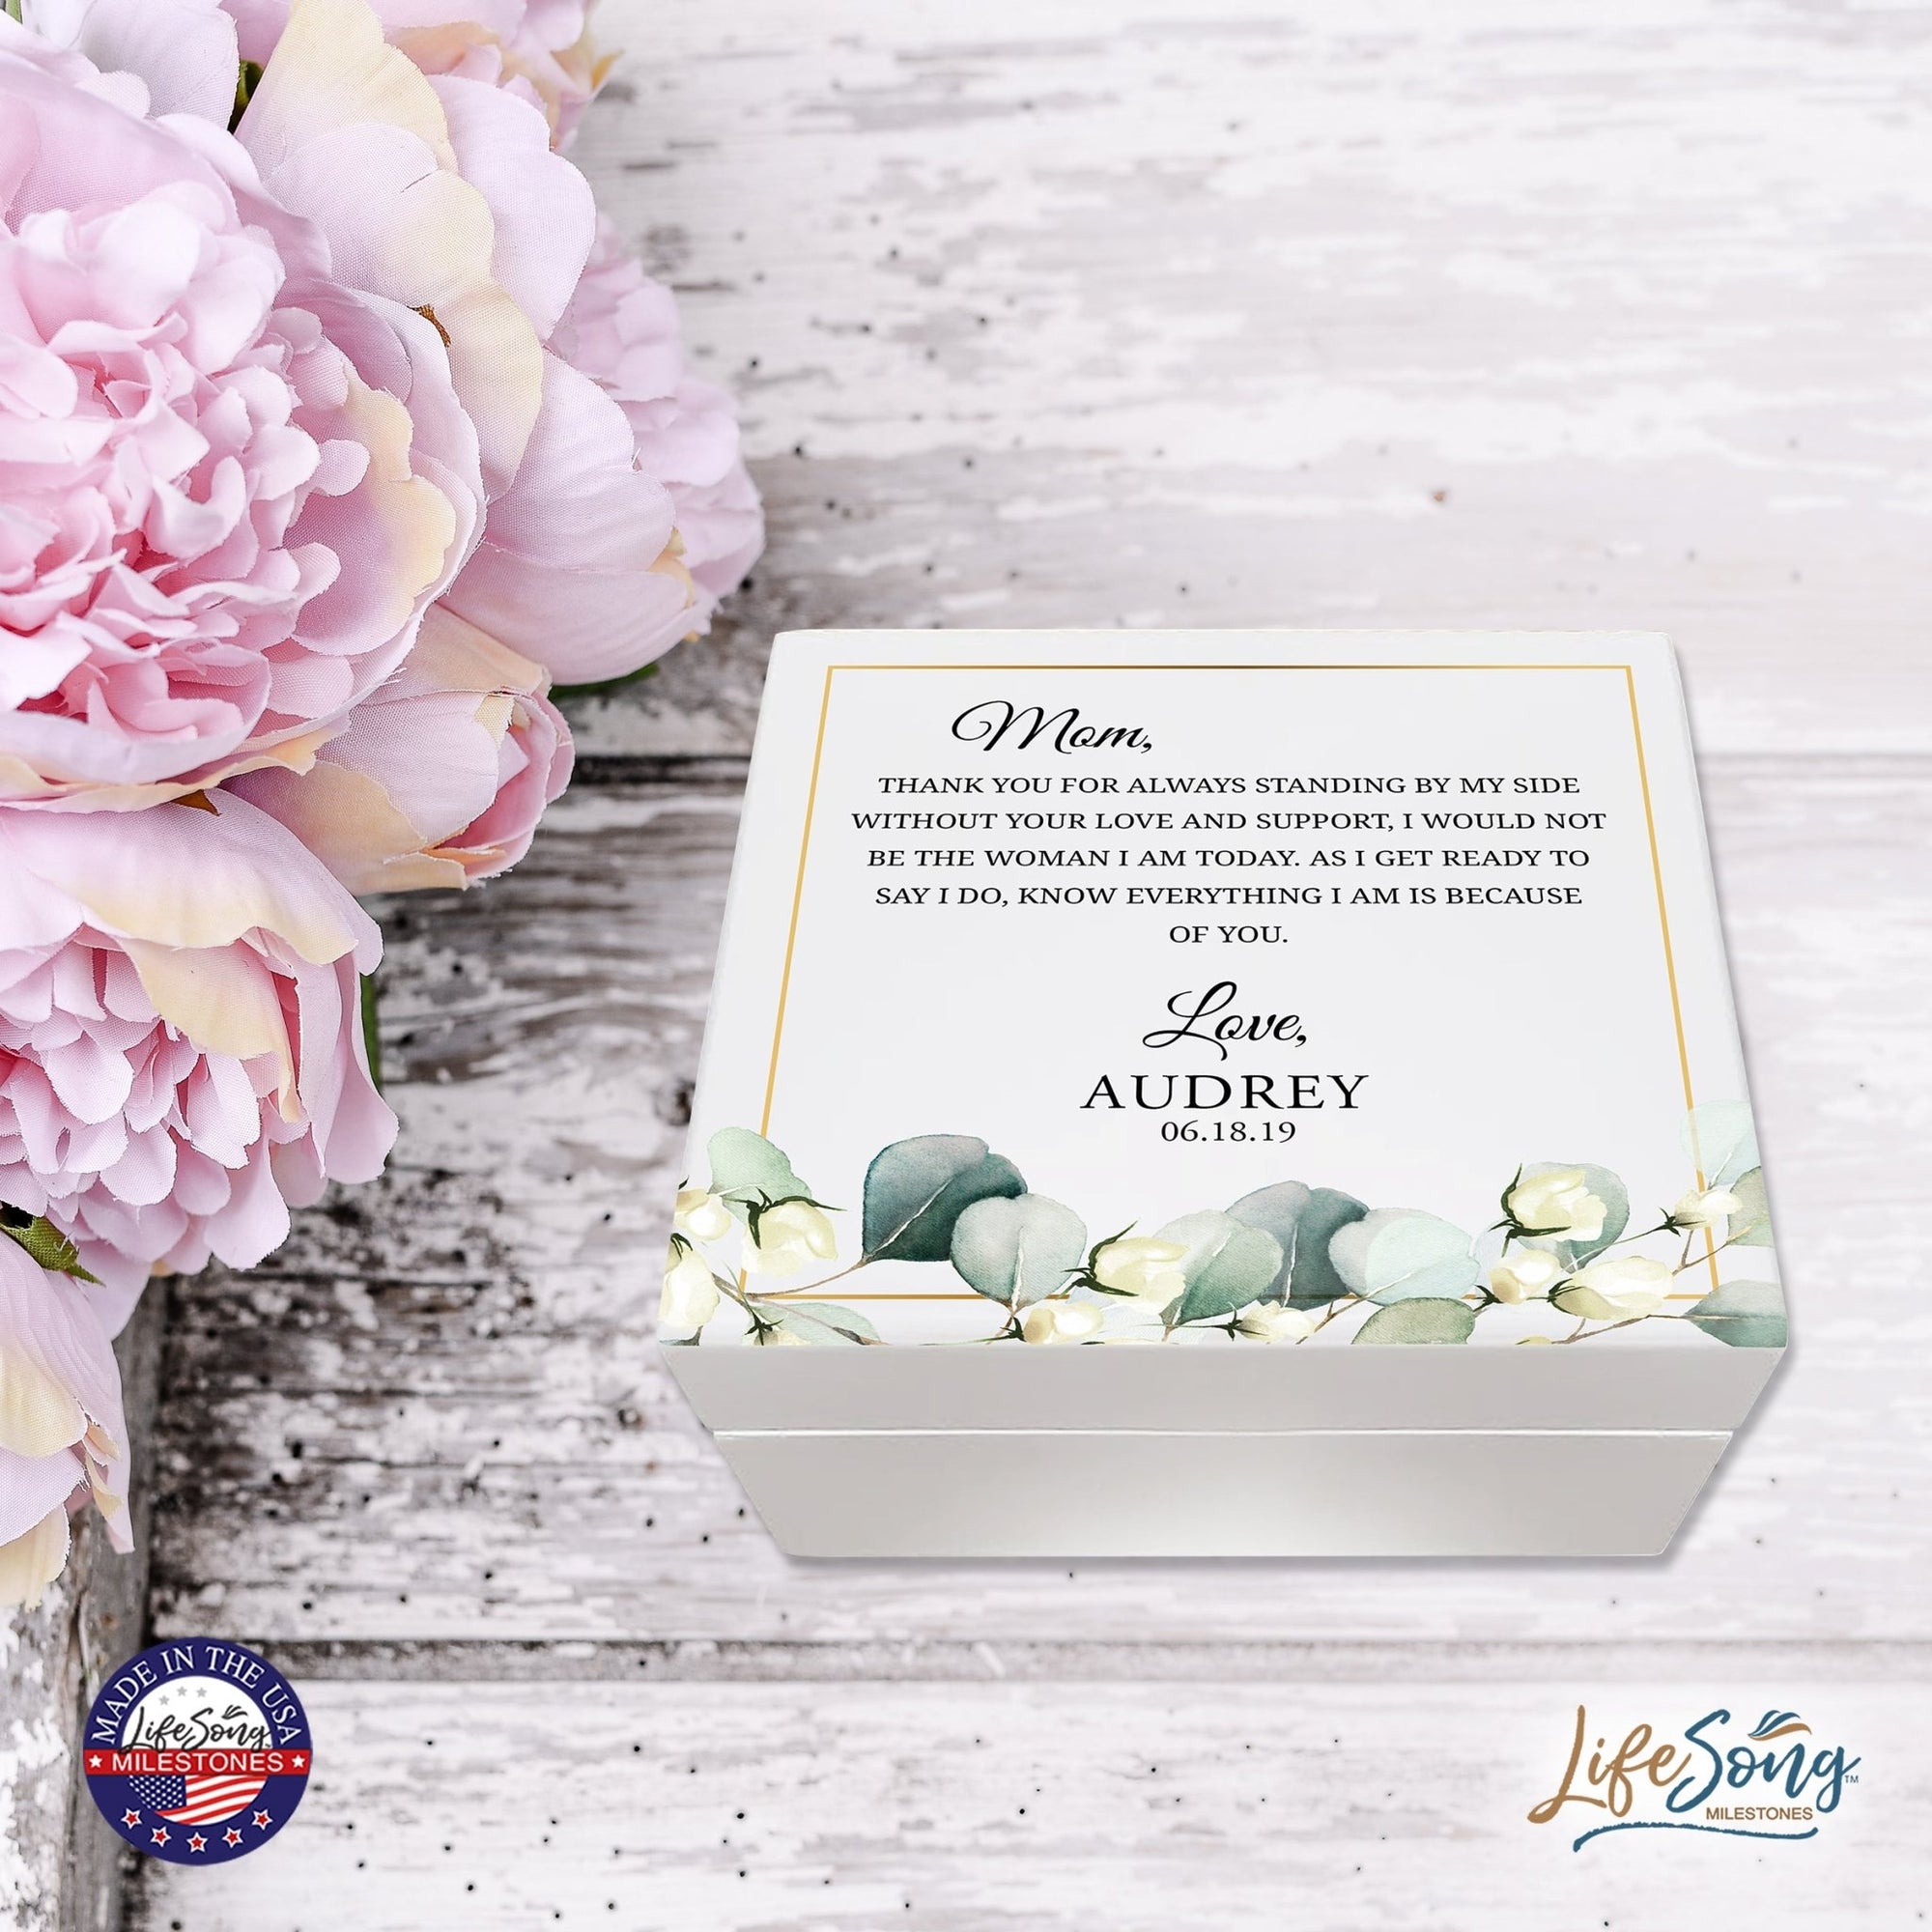 Personalized Memorable Mother’s White Keepsake Box 6x5.5 with inspiring verse - Thank You - LifeSong Milestones